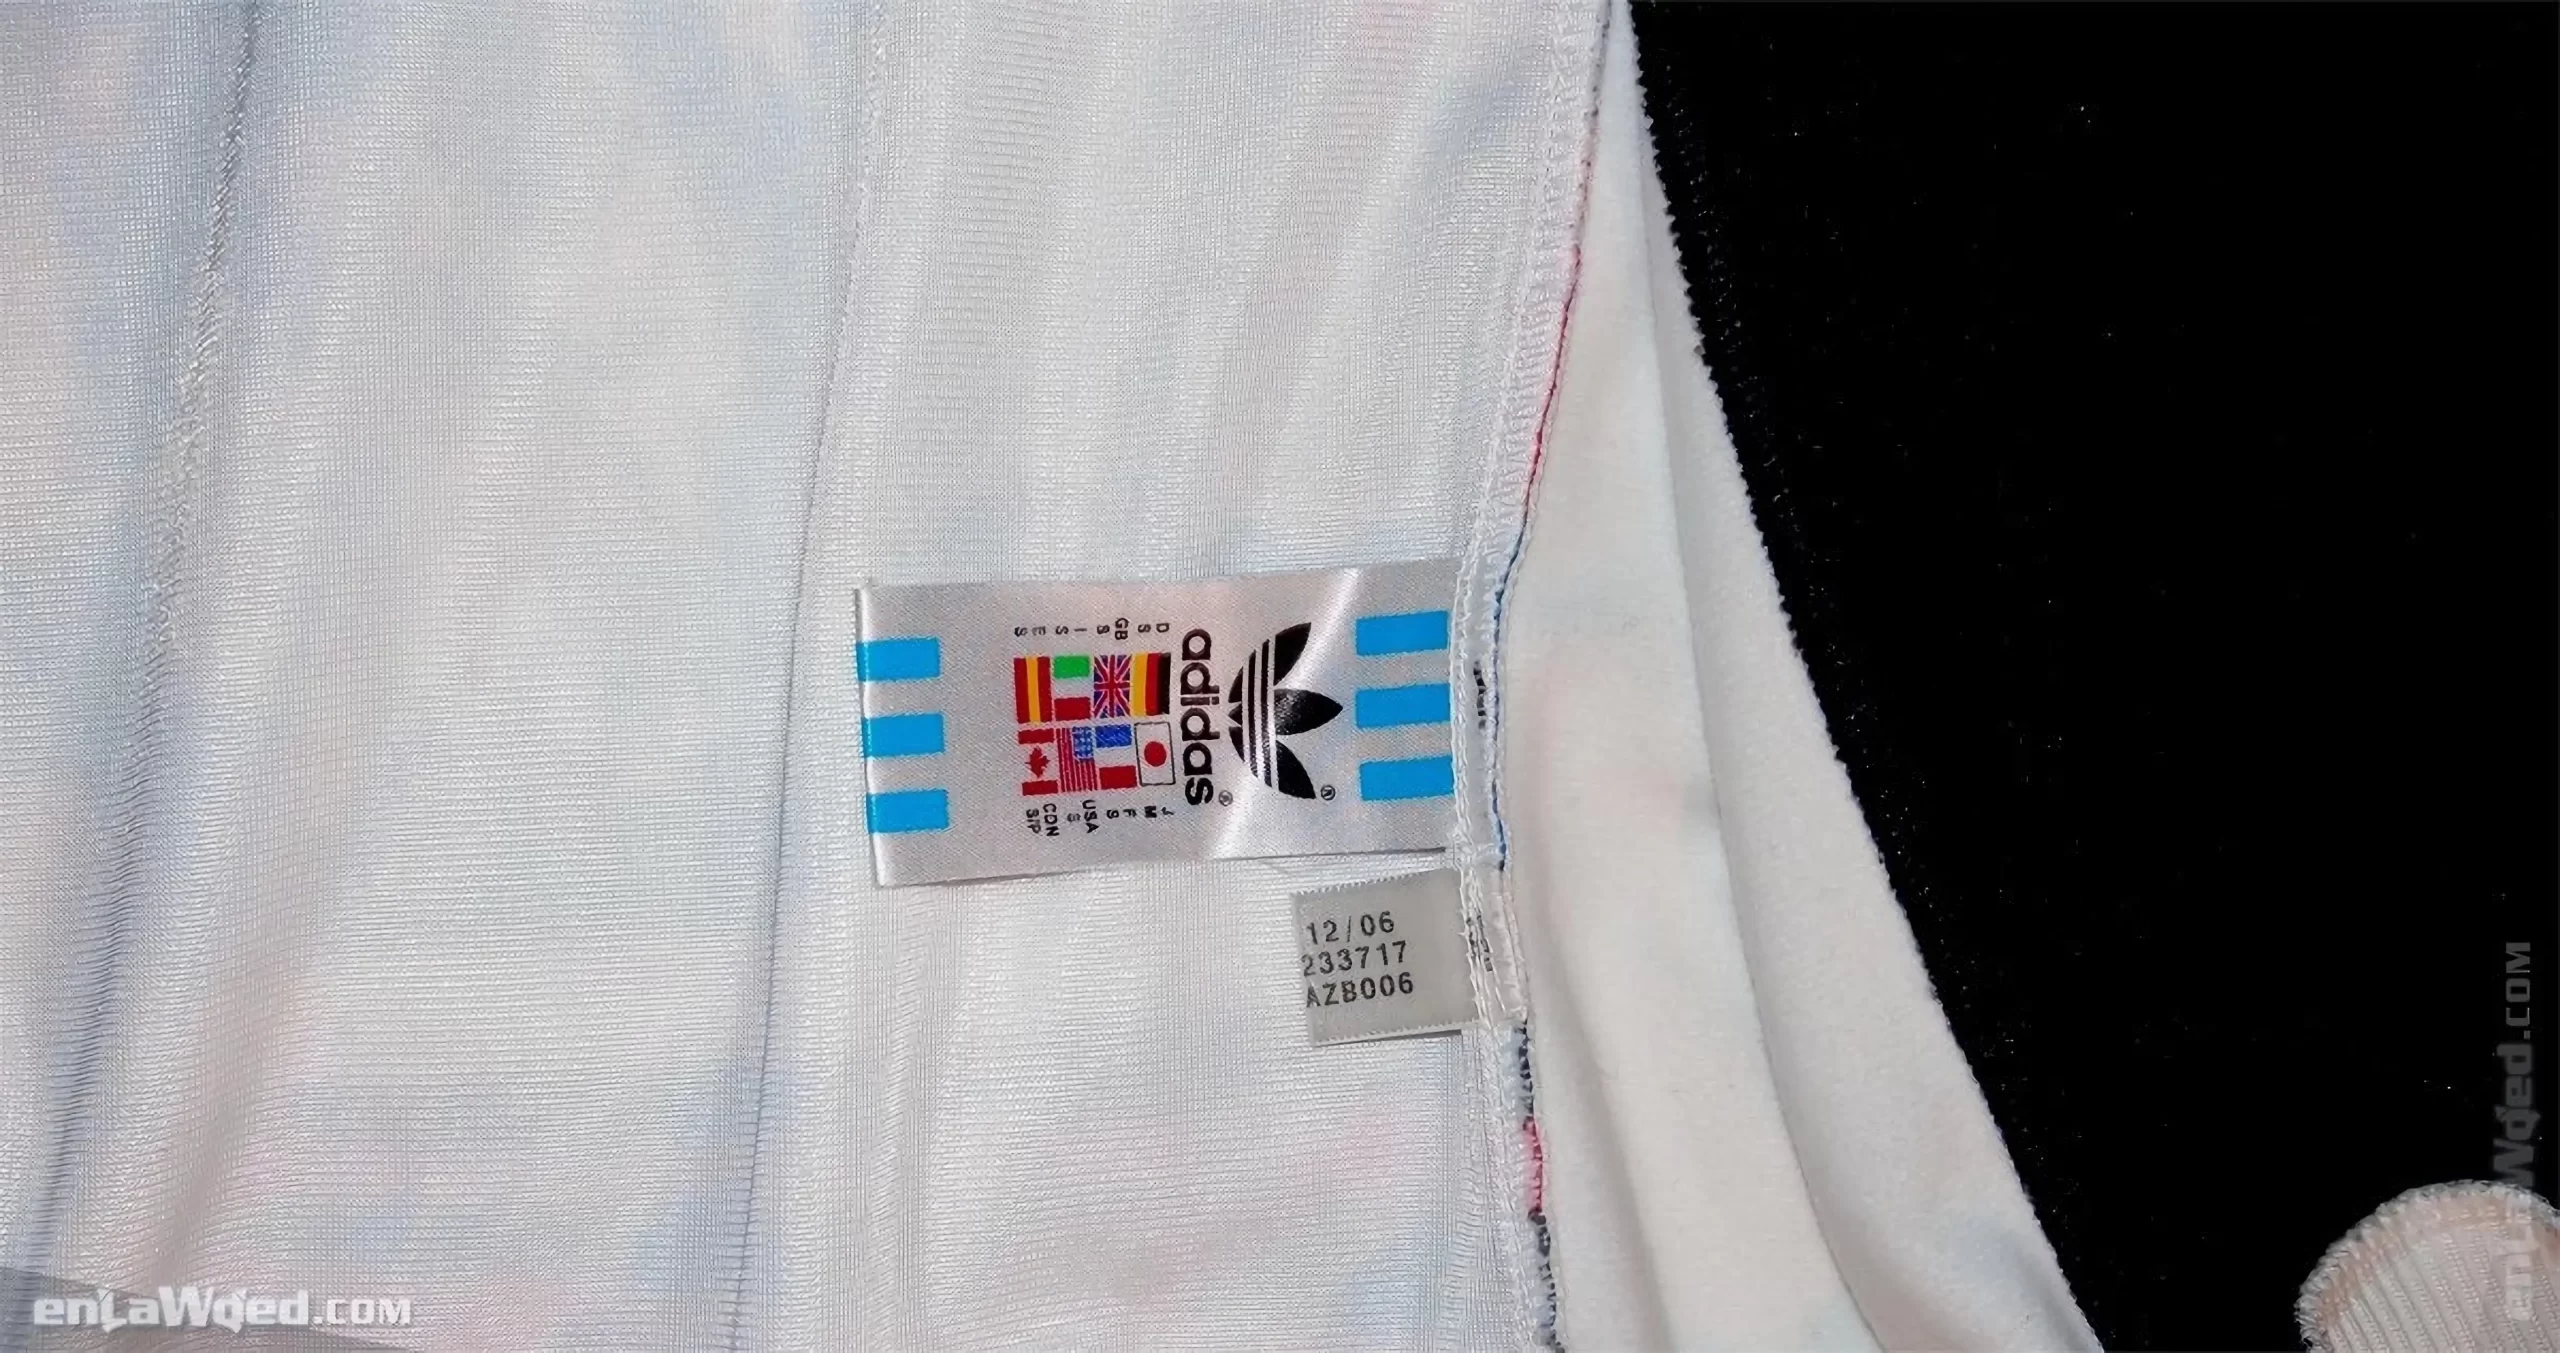 Adidas tag of the Chicago jacket, with the month and year of fabrication: 12/2006